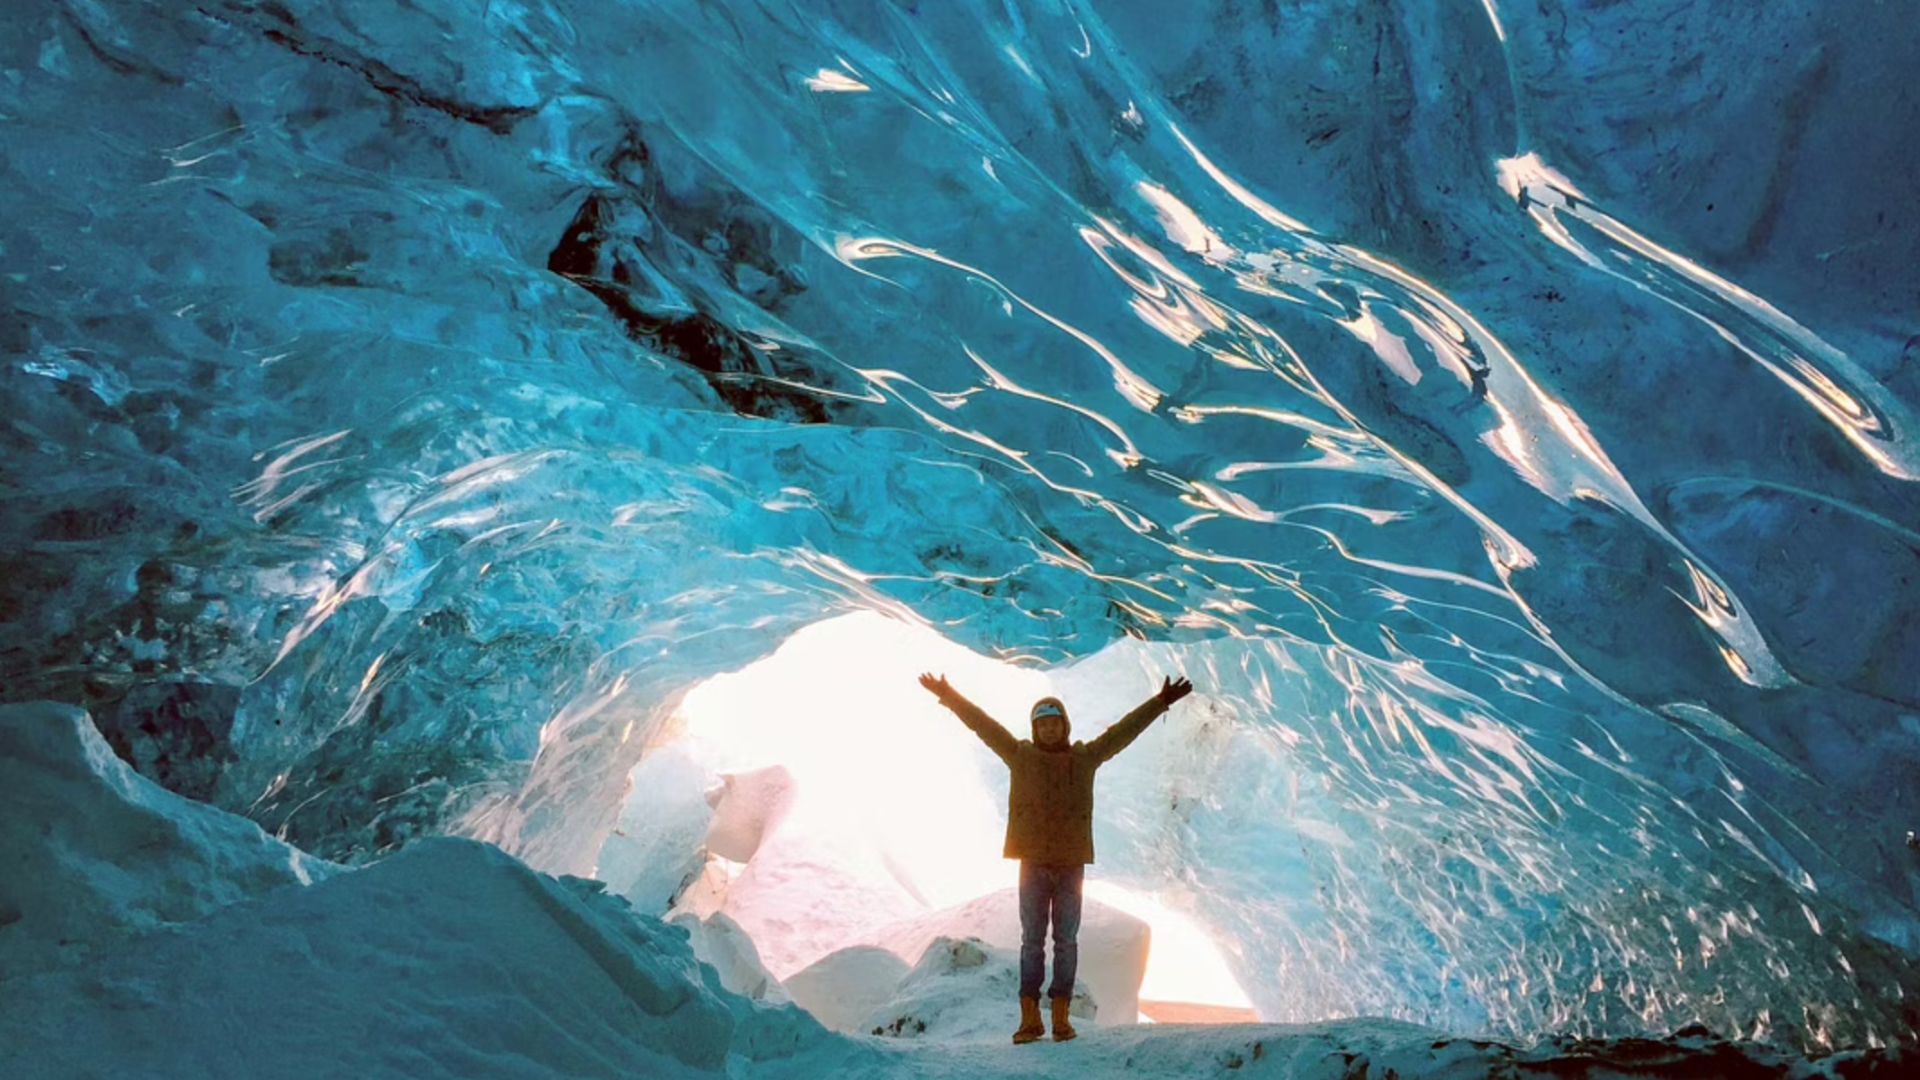 The ice cave in Iceland